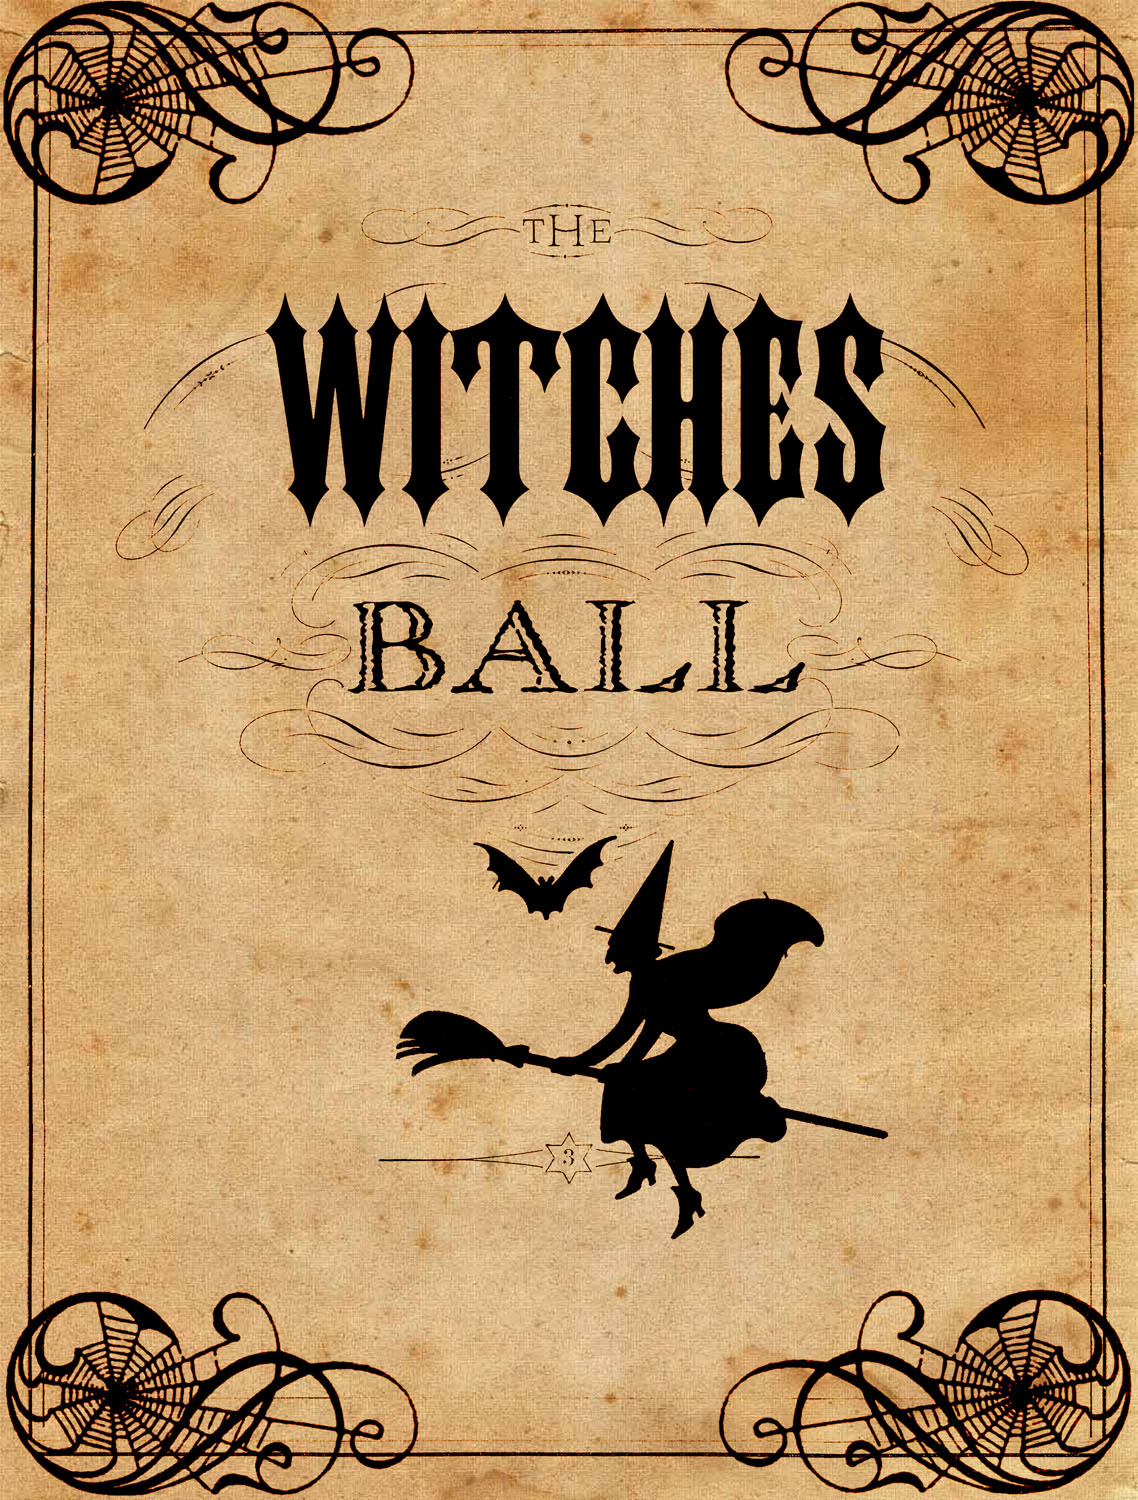 Vintage Halloween Printable - The Witches Ball - The Graphics Fairy - Free Printable Vintage Halloween Images